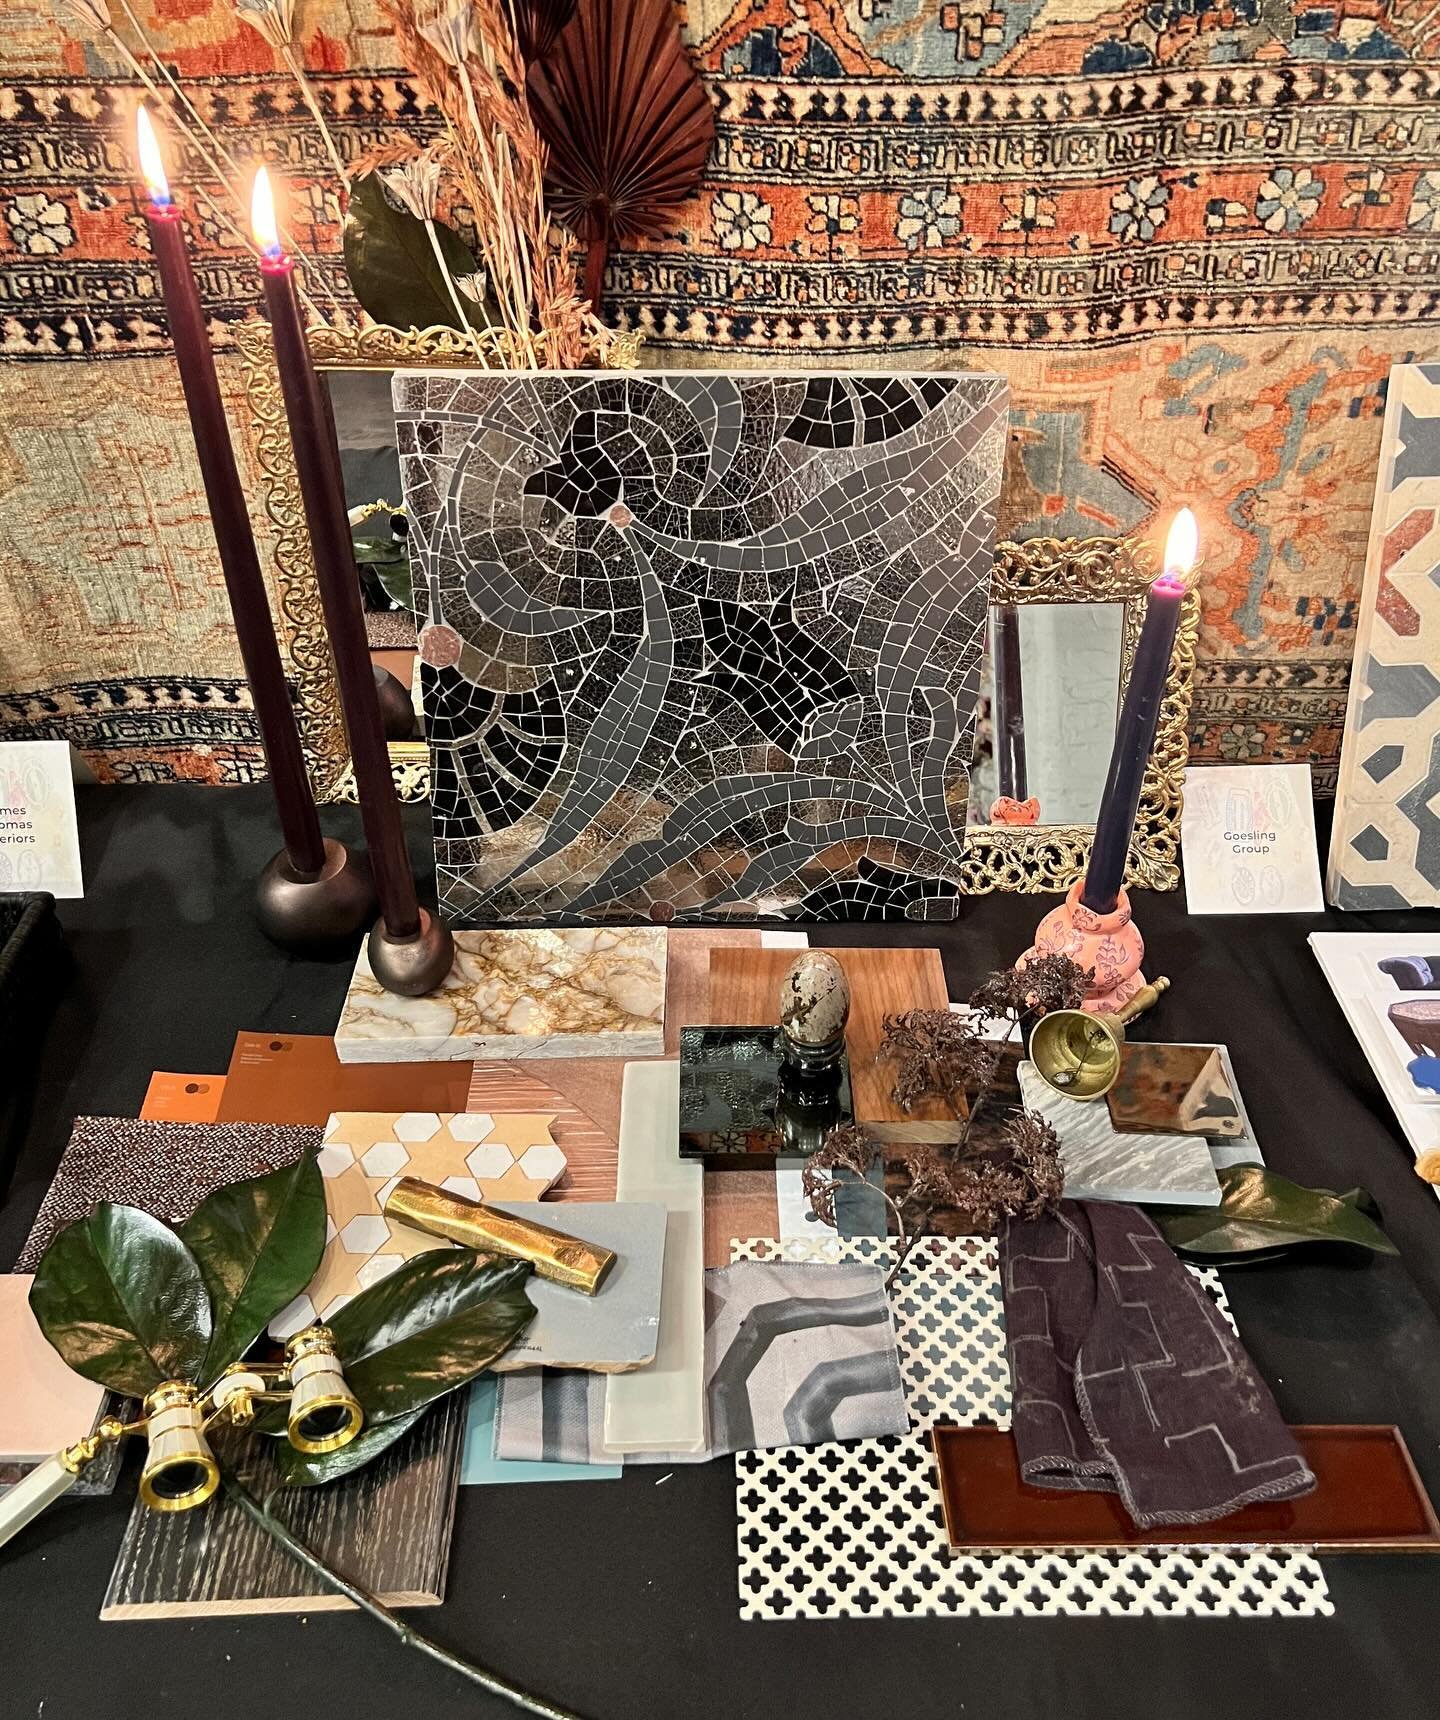 When in doubt, add fire 🔥 

Thank you to Oscar Isberian Rugs + The Fine Line for inviting us to participate in their &lsquo;Around the World&rsquo; event last night!

We designed a custom tile board, inspired by a Persian rug from 1820 and built a c